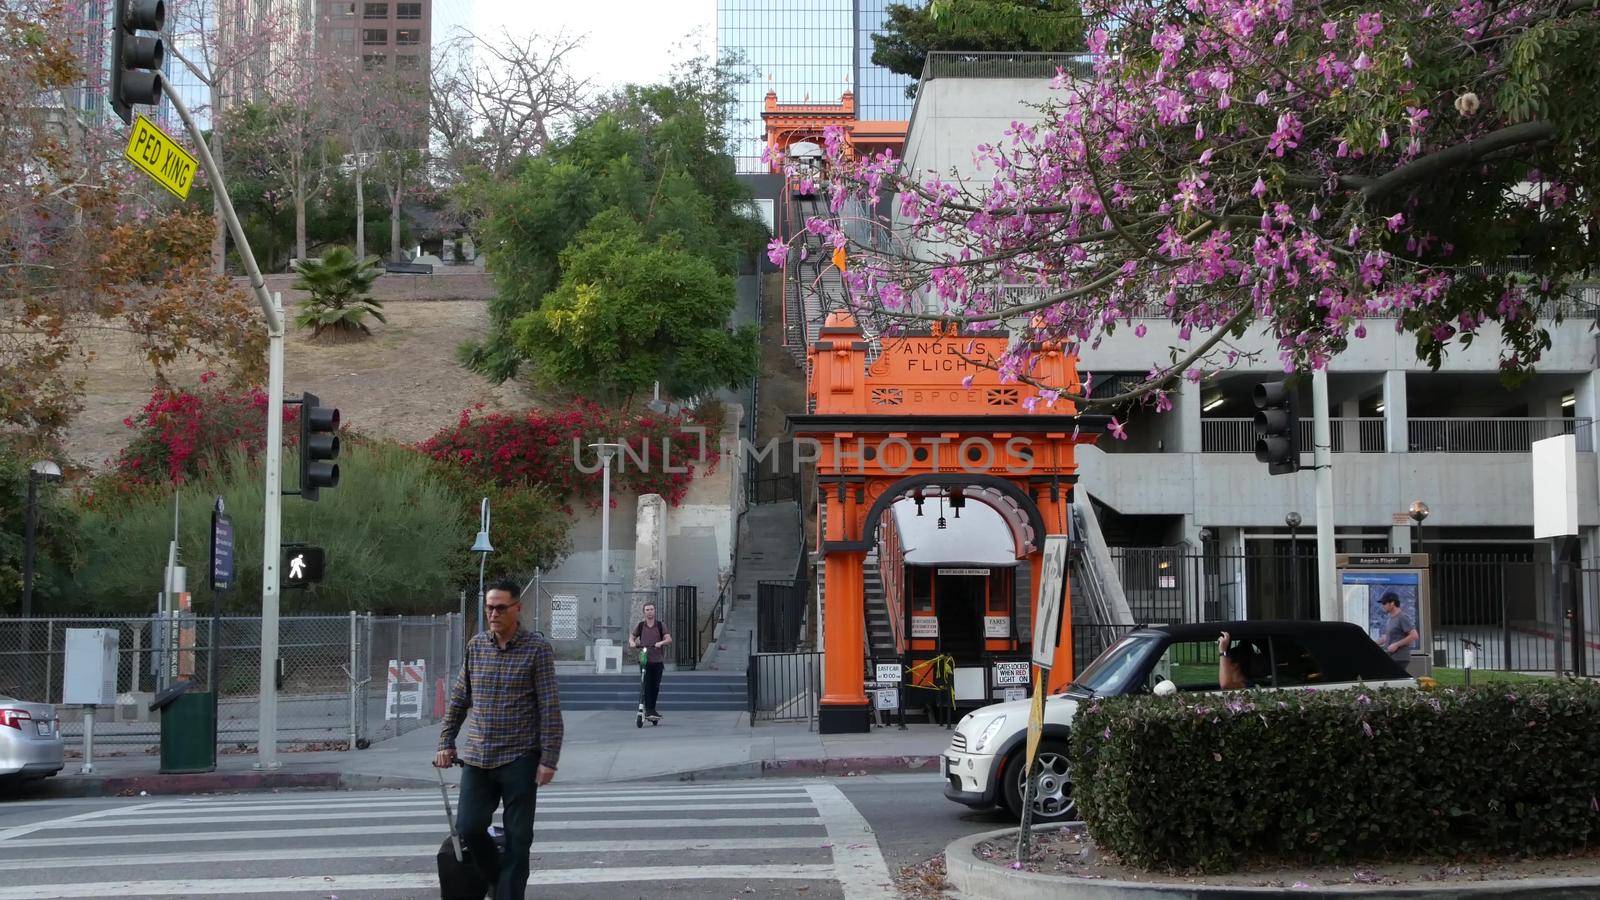 LOS ANGELES, CALIFORNIA, USA - 30 OCT 2019: Angels Flight retro funicular railway cabin. Vintage cable car station. Old-fashioned public passenger transport in Hollywood. Historic tourist landmark by DogoraSun